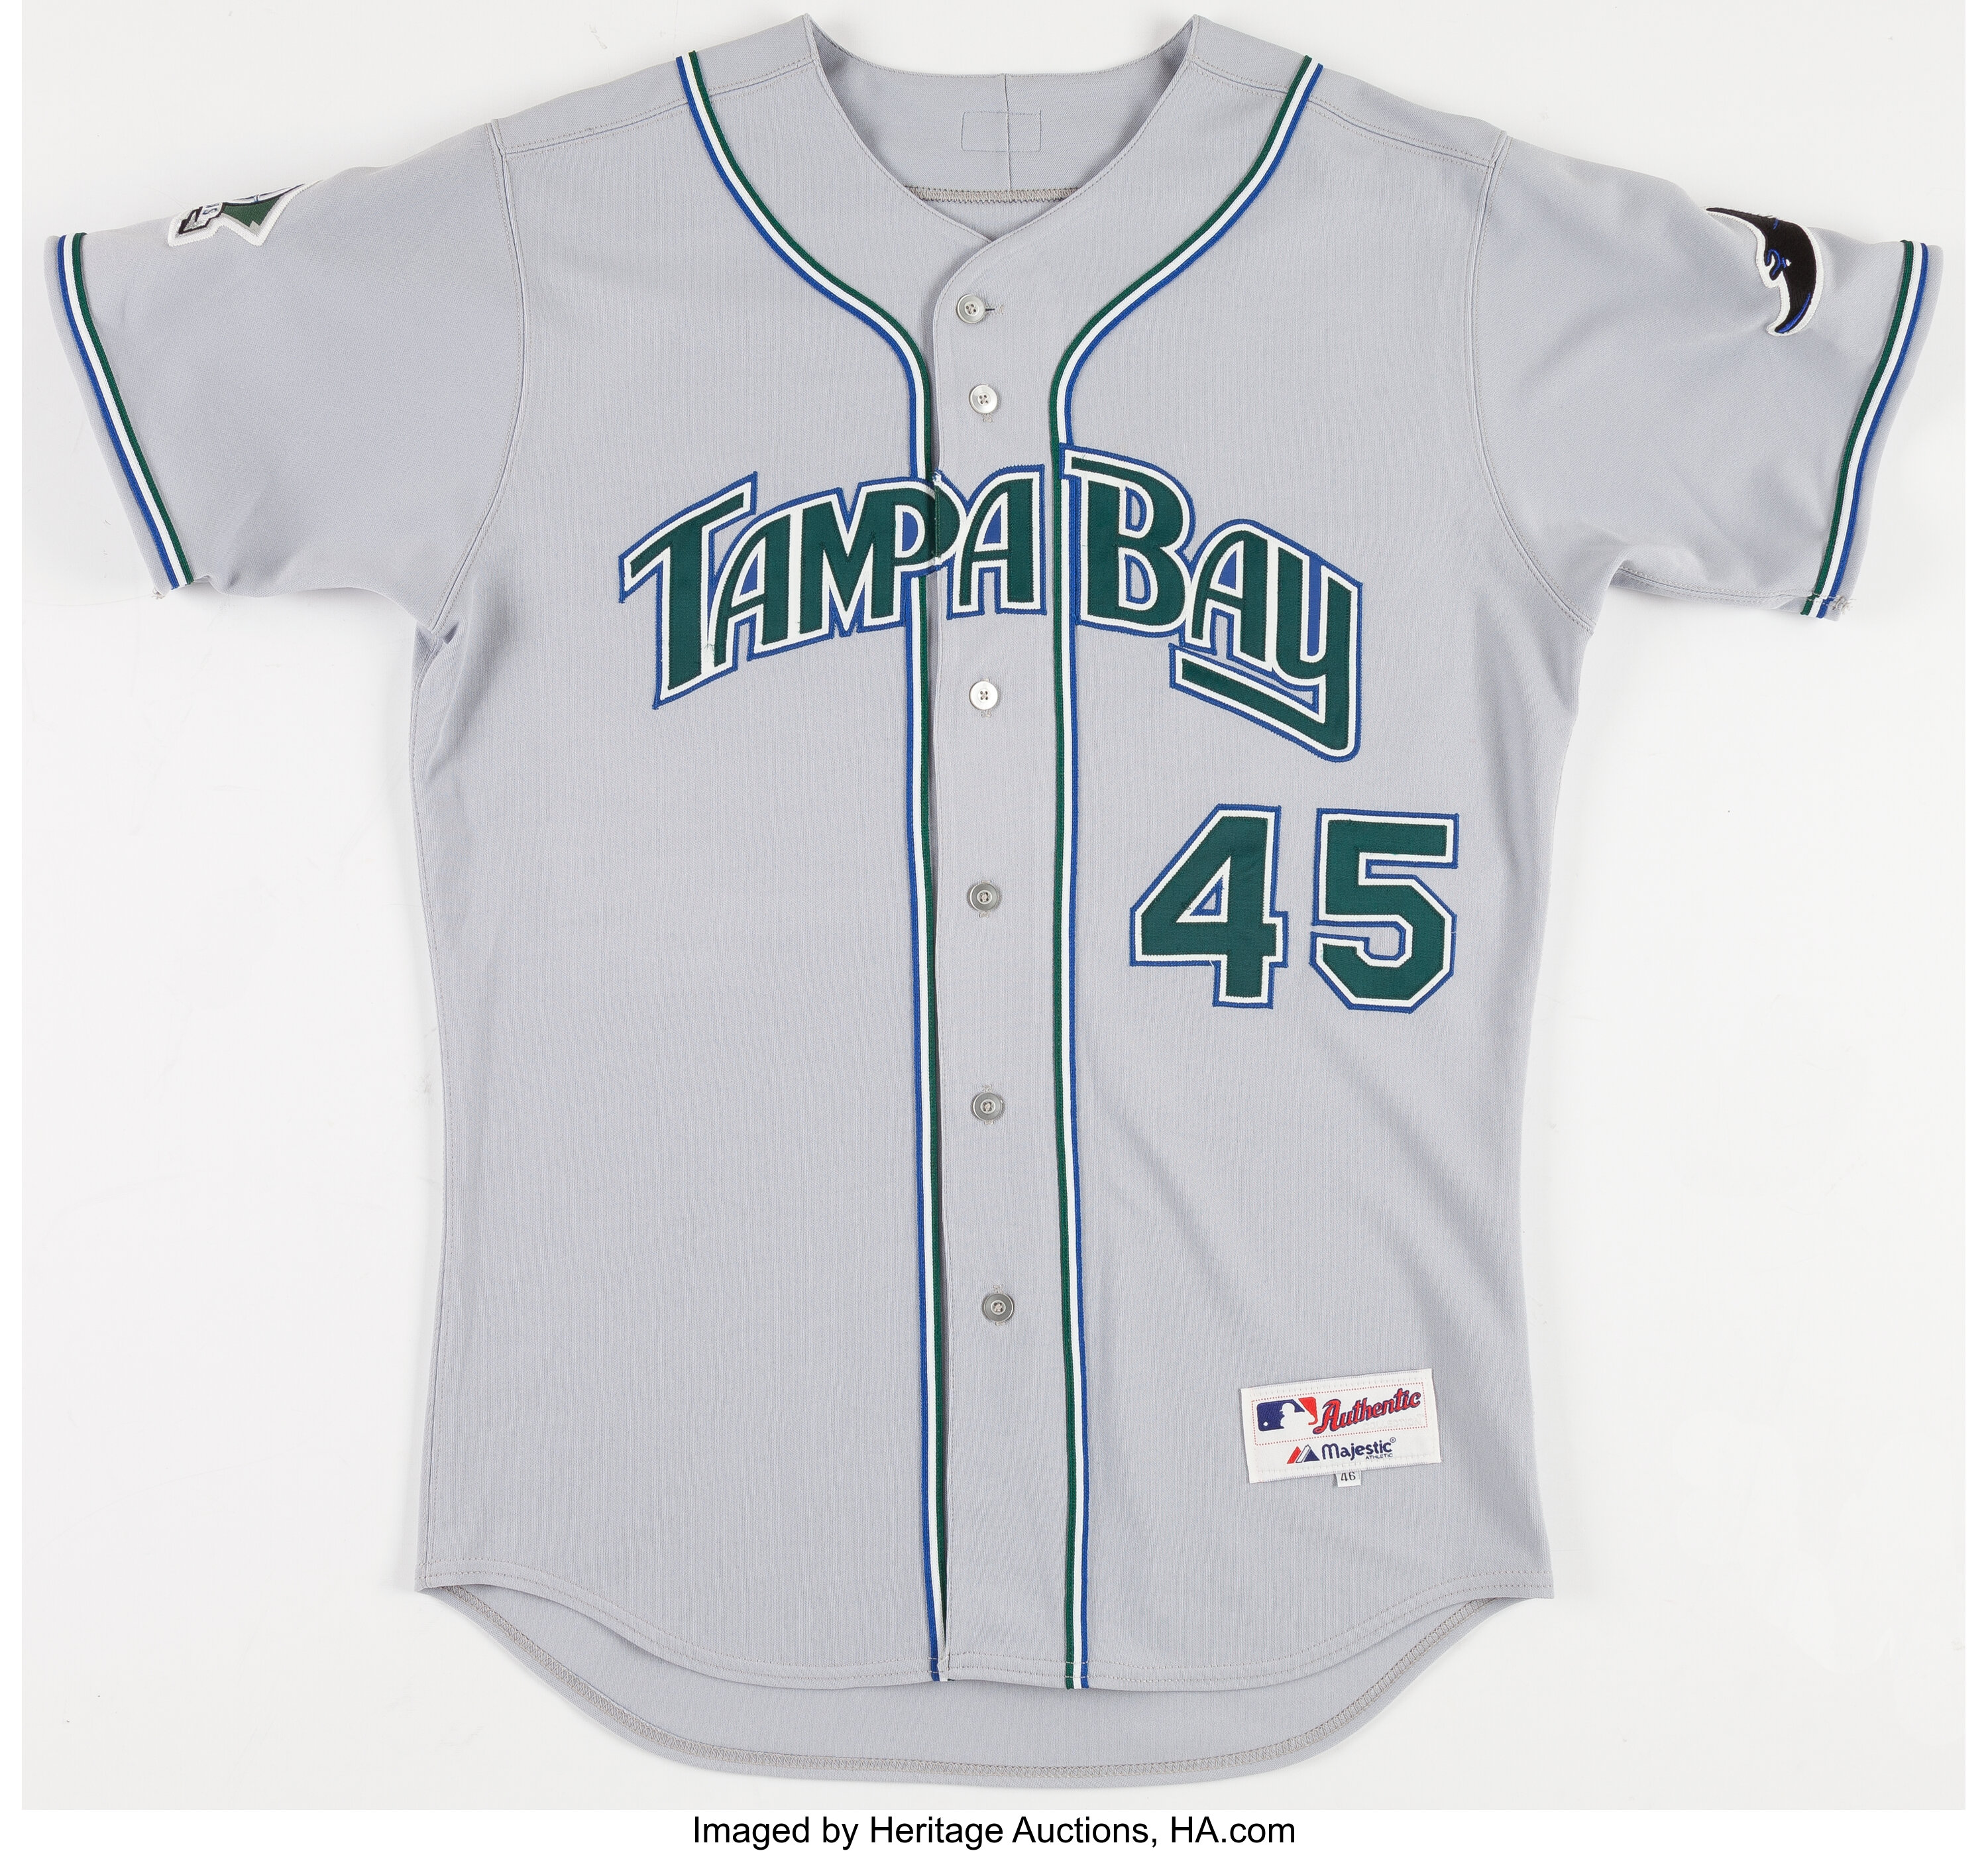 Tampa Bay Devil Rays 2001 uniform artwork, This is a highly…